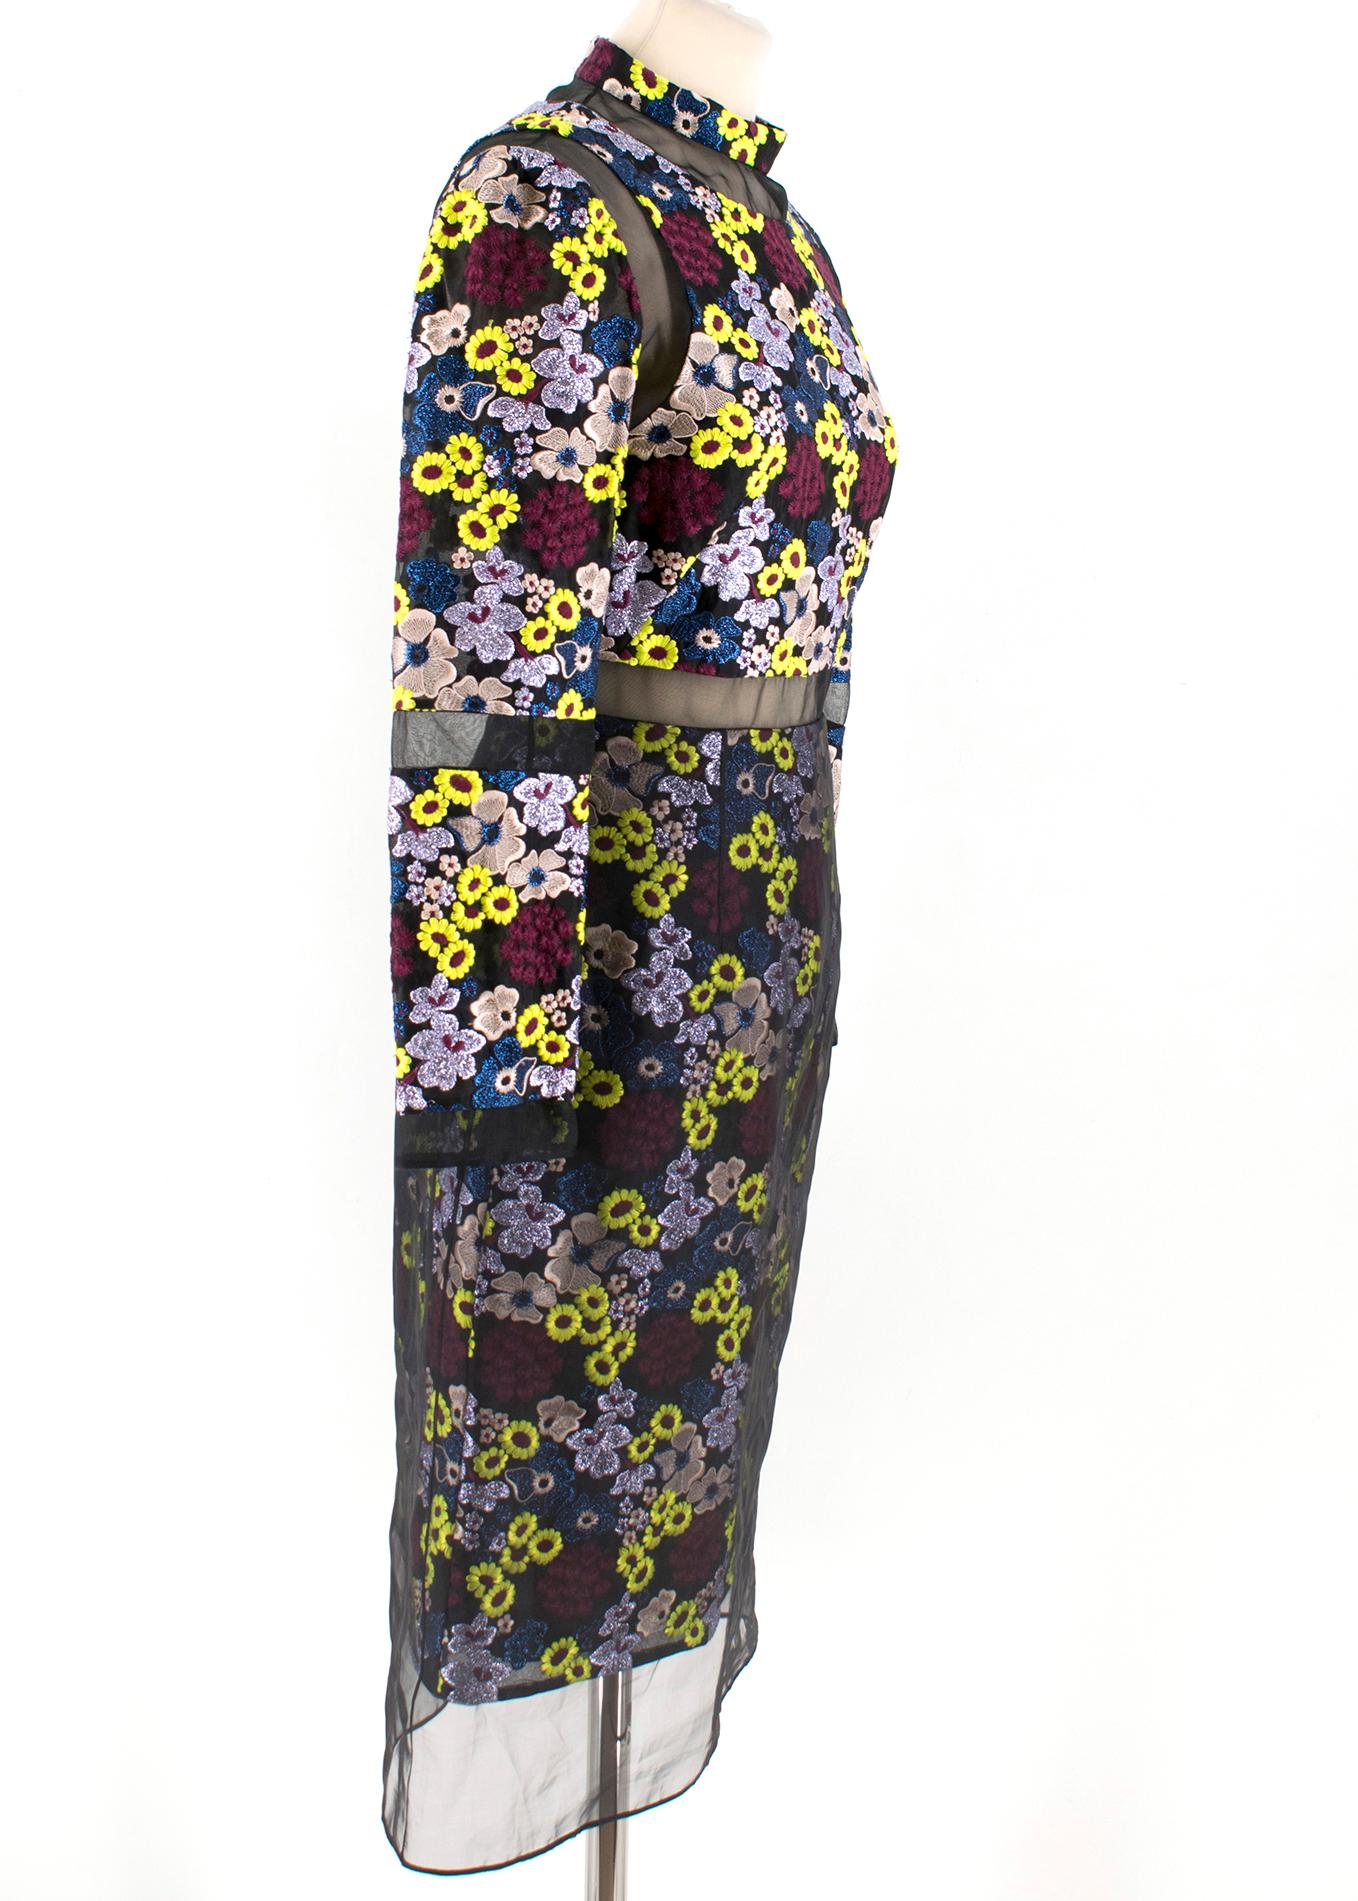 This Erdem dress comes in a beautiful contrast between black organza with see-through parts and bright purple/yellow/burgundy flowers. RRP £1370

- Long sleeves 
- Hidden zip closure 
- Made in England
- Outer: 32% Polyester, 21% Silk, 18% Cotton,